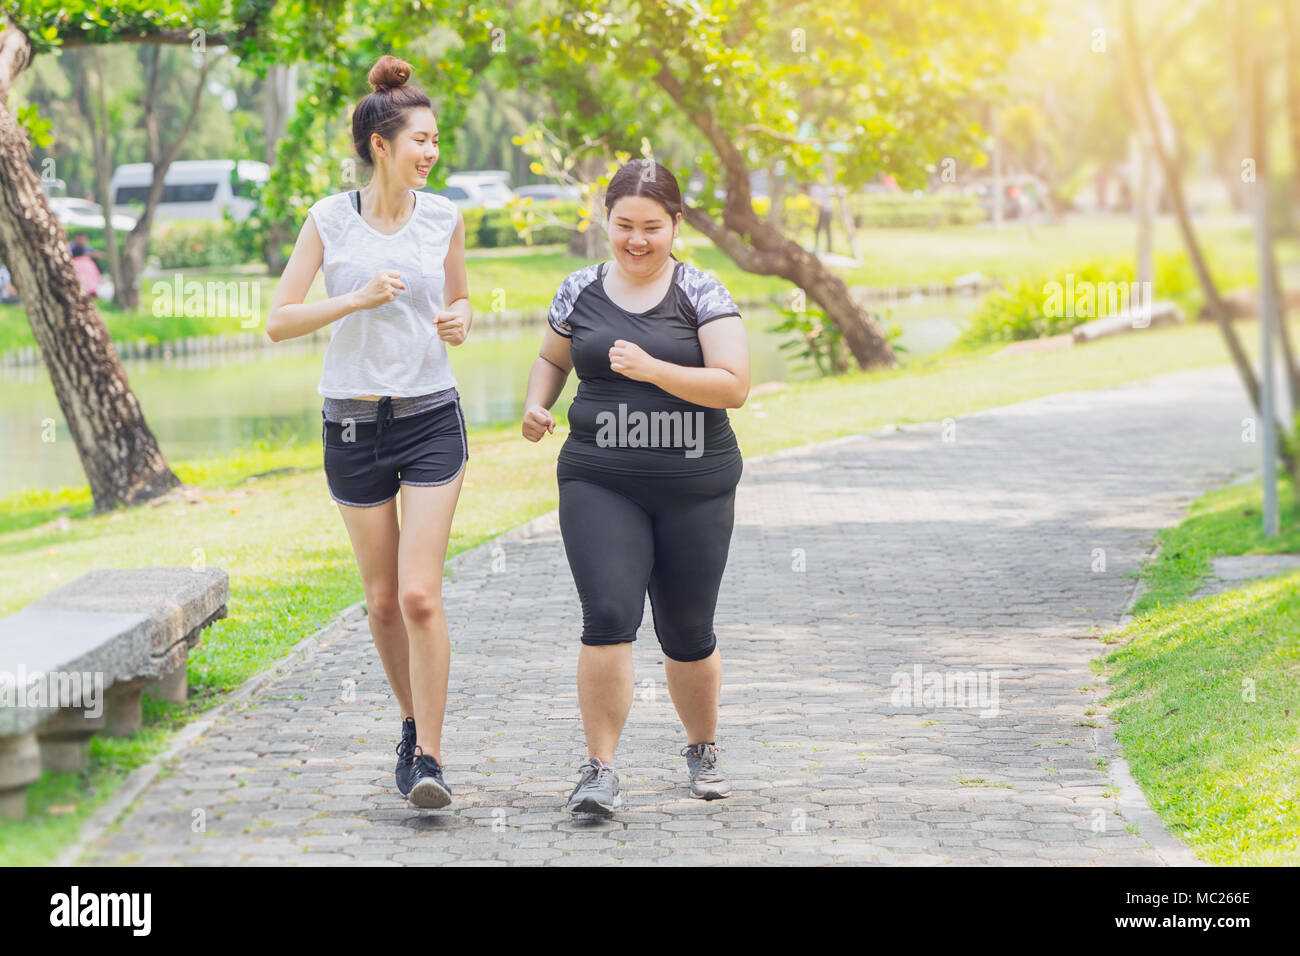 Asian teen running fat and thin friendship jogging in the Park Stock Photo